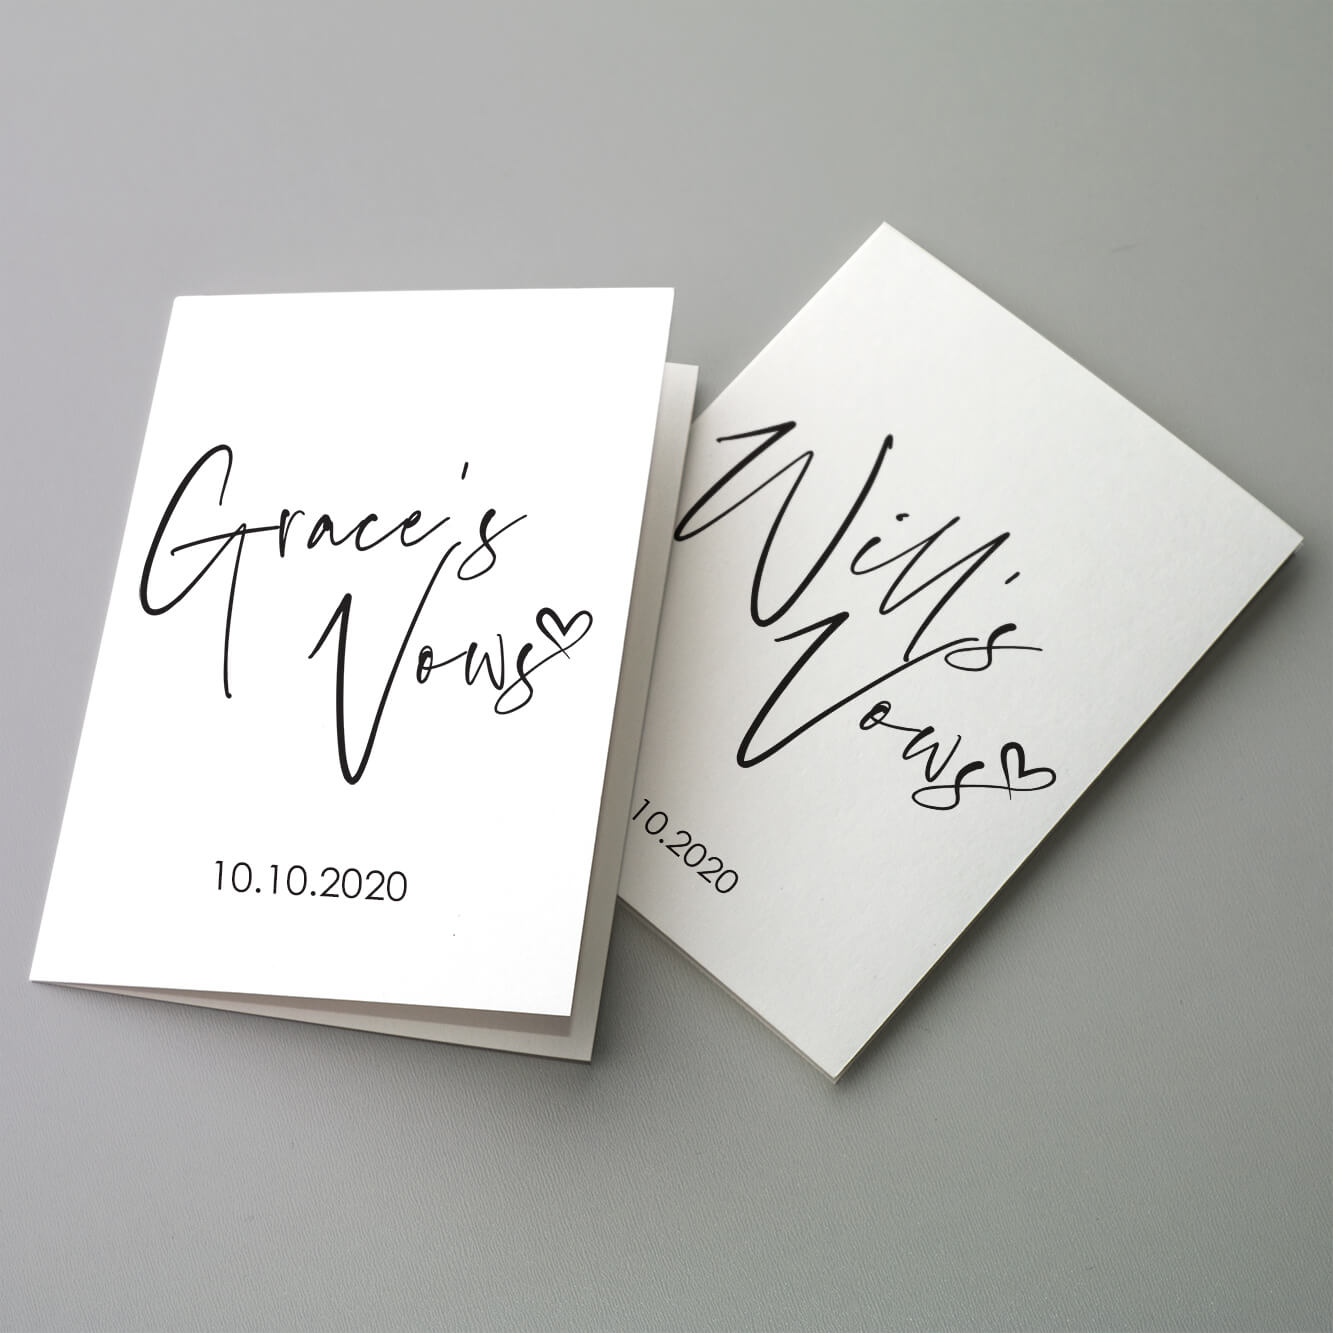 Personalised vow cards set of 2 | Luxury wedding stationery - Perth WA